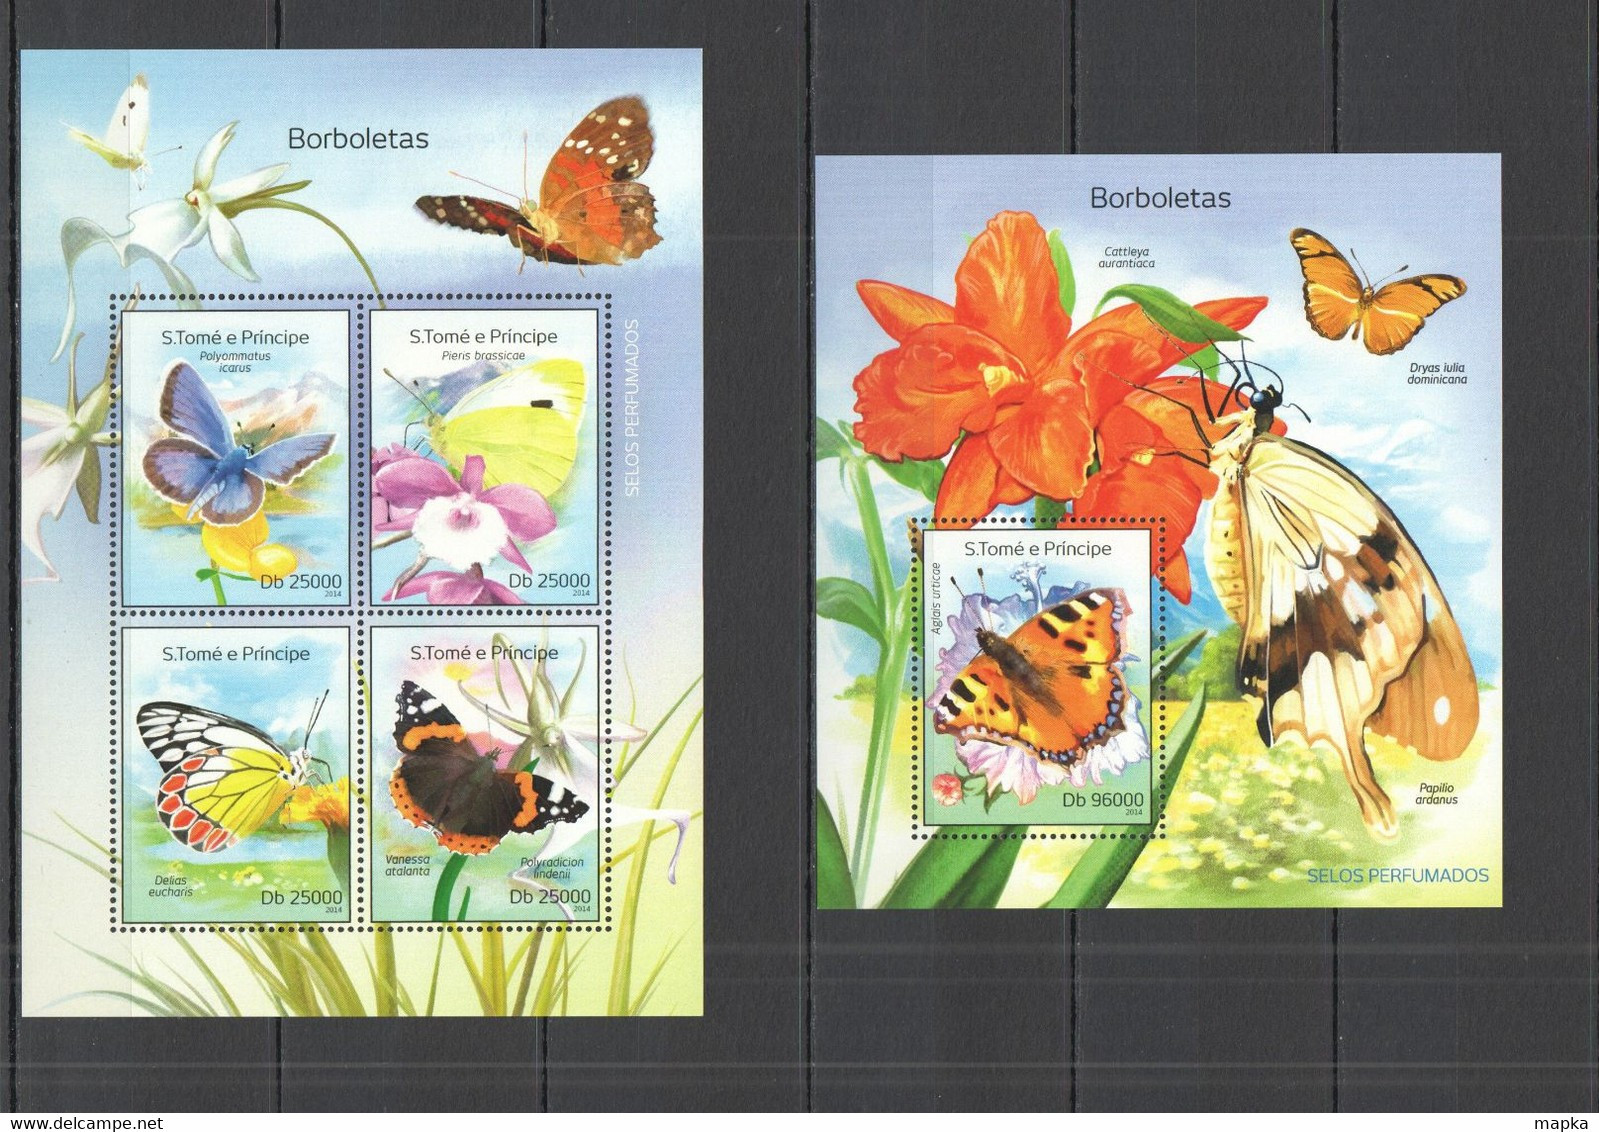 XX449 LAST ONE IN STOCK 2014 S. TOME E PRINCIPE FAUNA INSECTS BUTTERFLIES BORBOLETAS KB+BL MNH - Butterflies